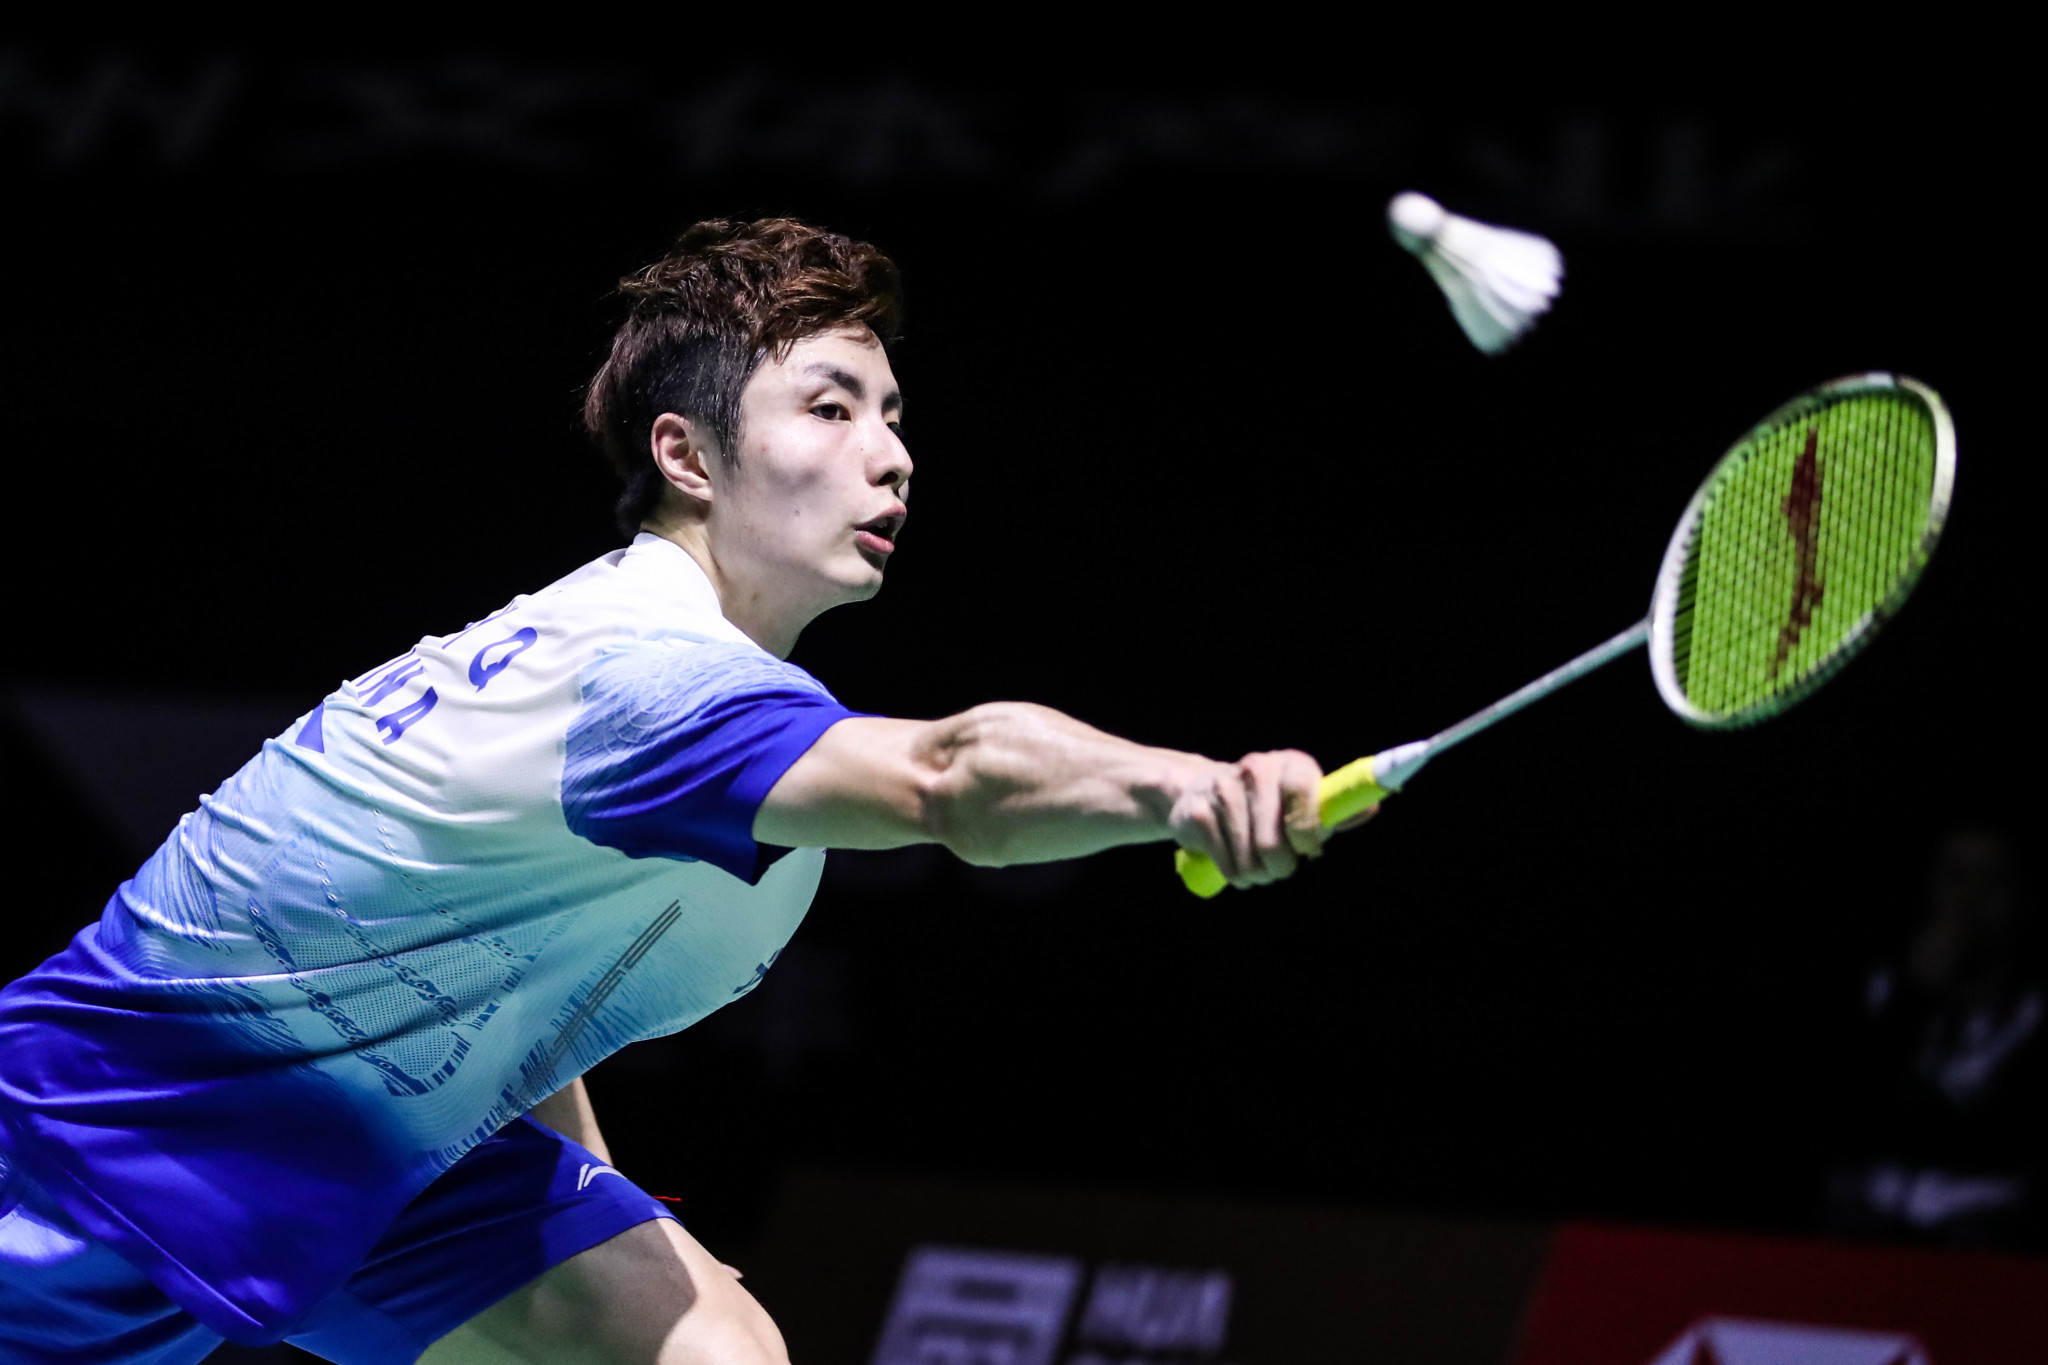 Shi Yuqi of China is aiming for his fifth BWF World Tour title at the Syed Modi International Championships ©Getty Images